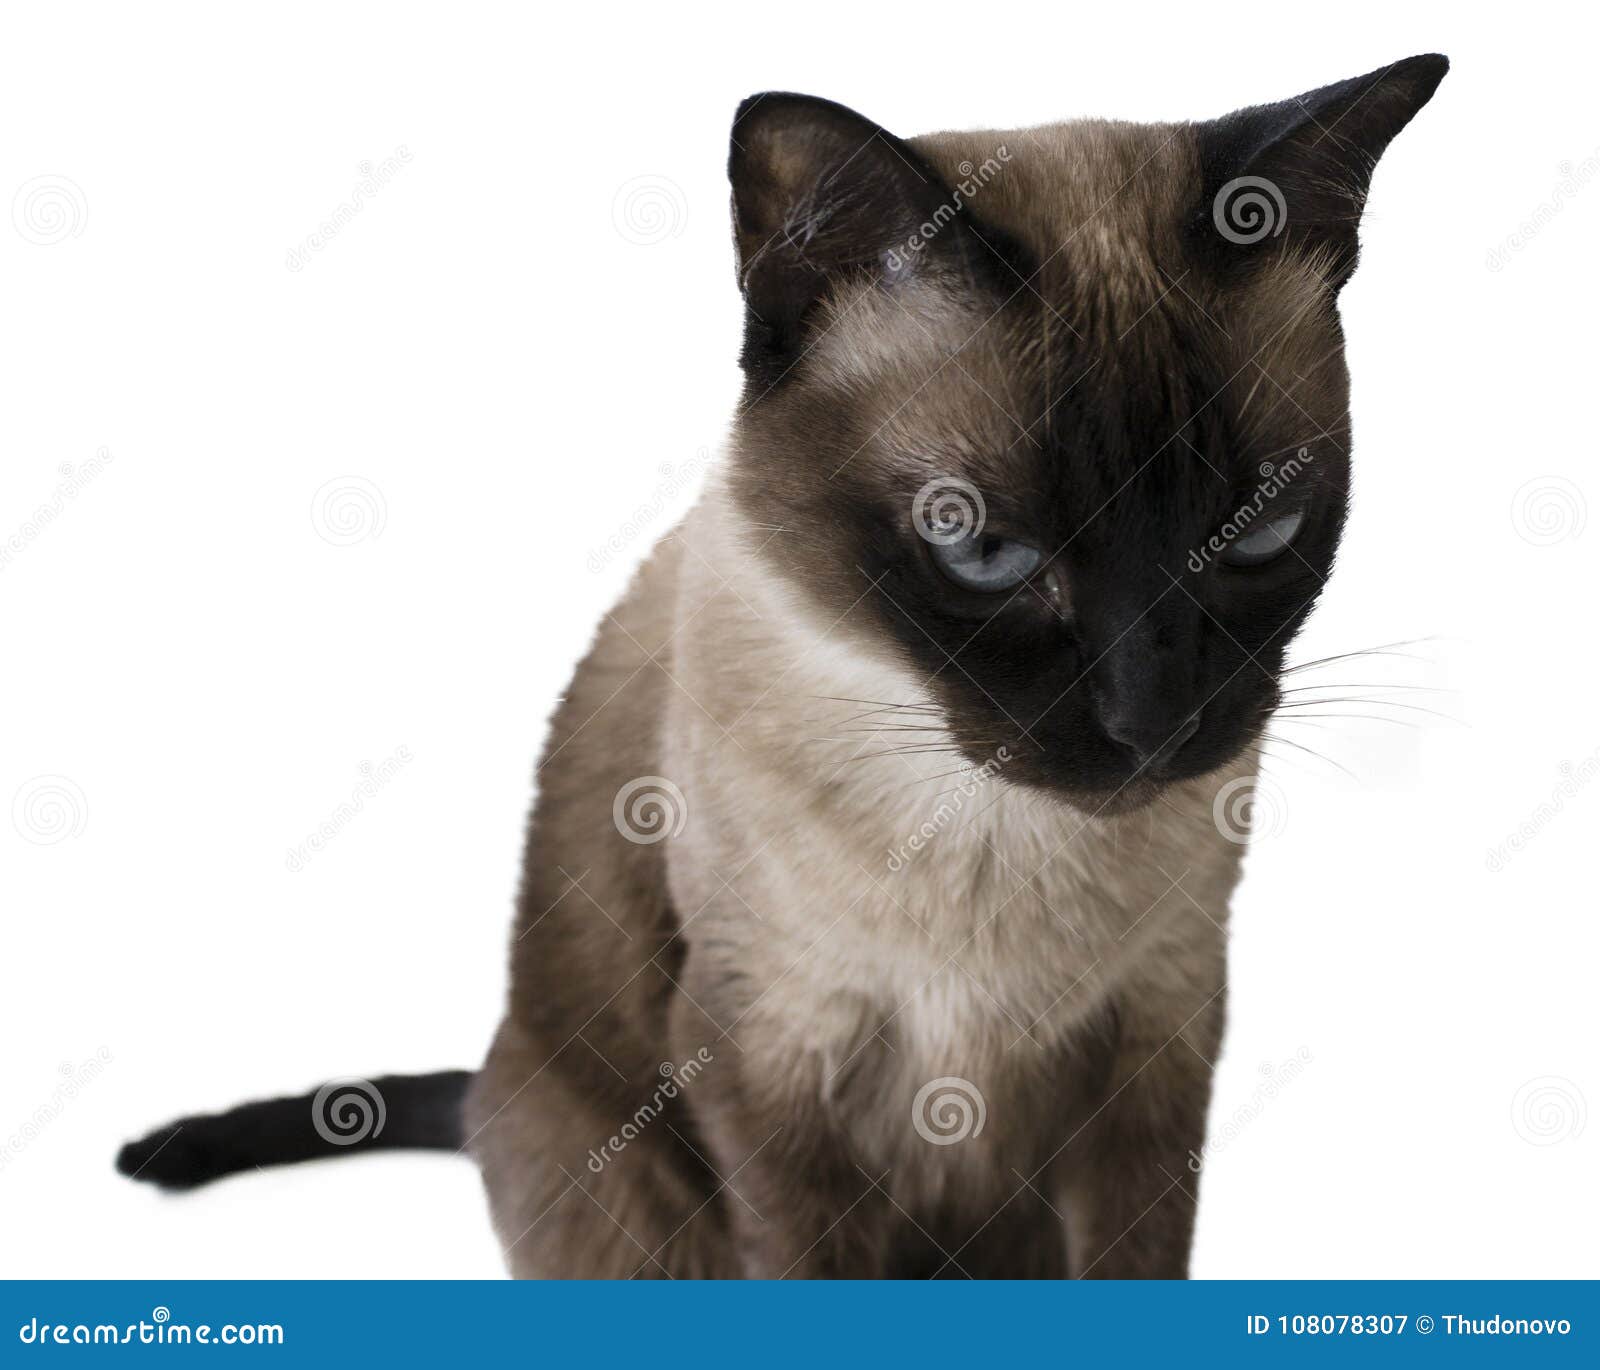 Angry Cat. Siamese Cat Staring Hatefully at the Camera. Stock Image